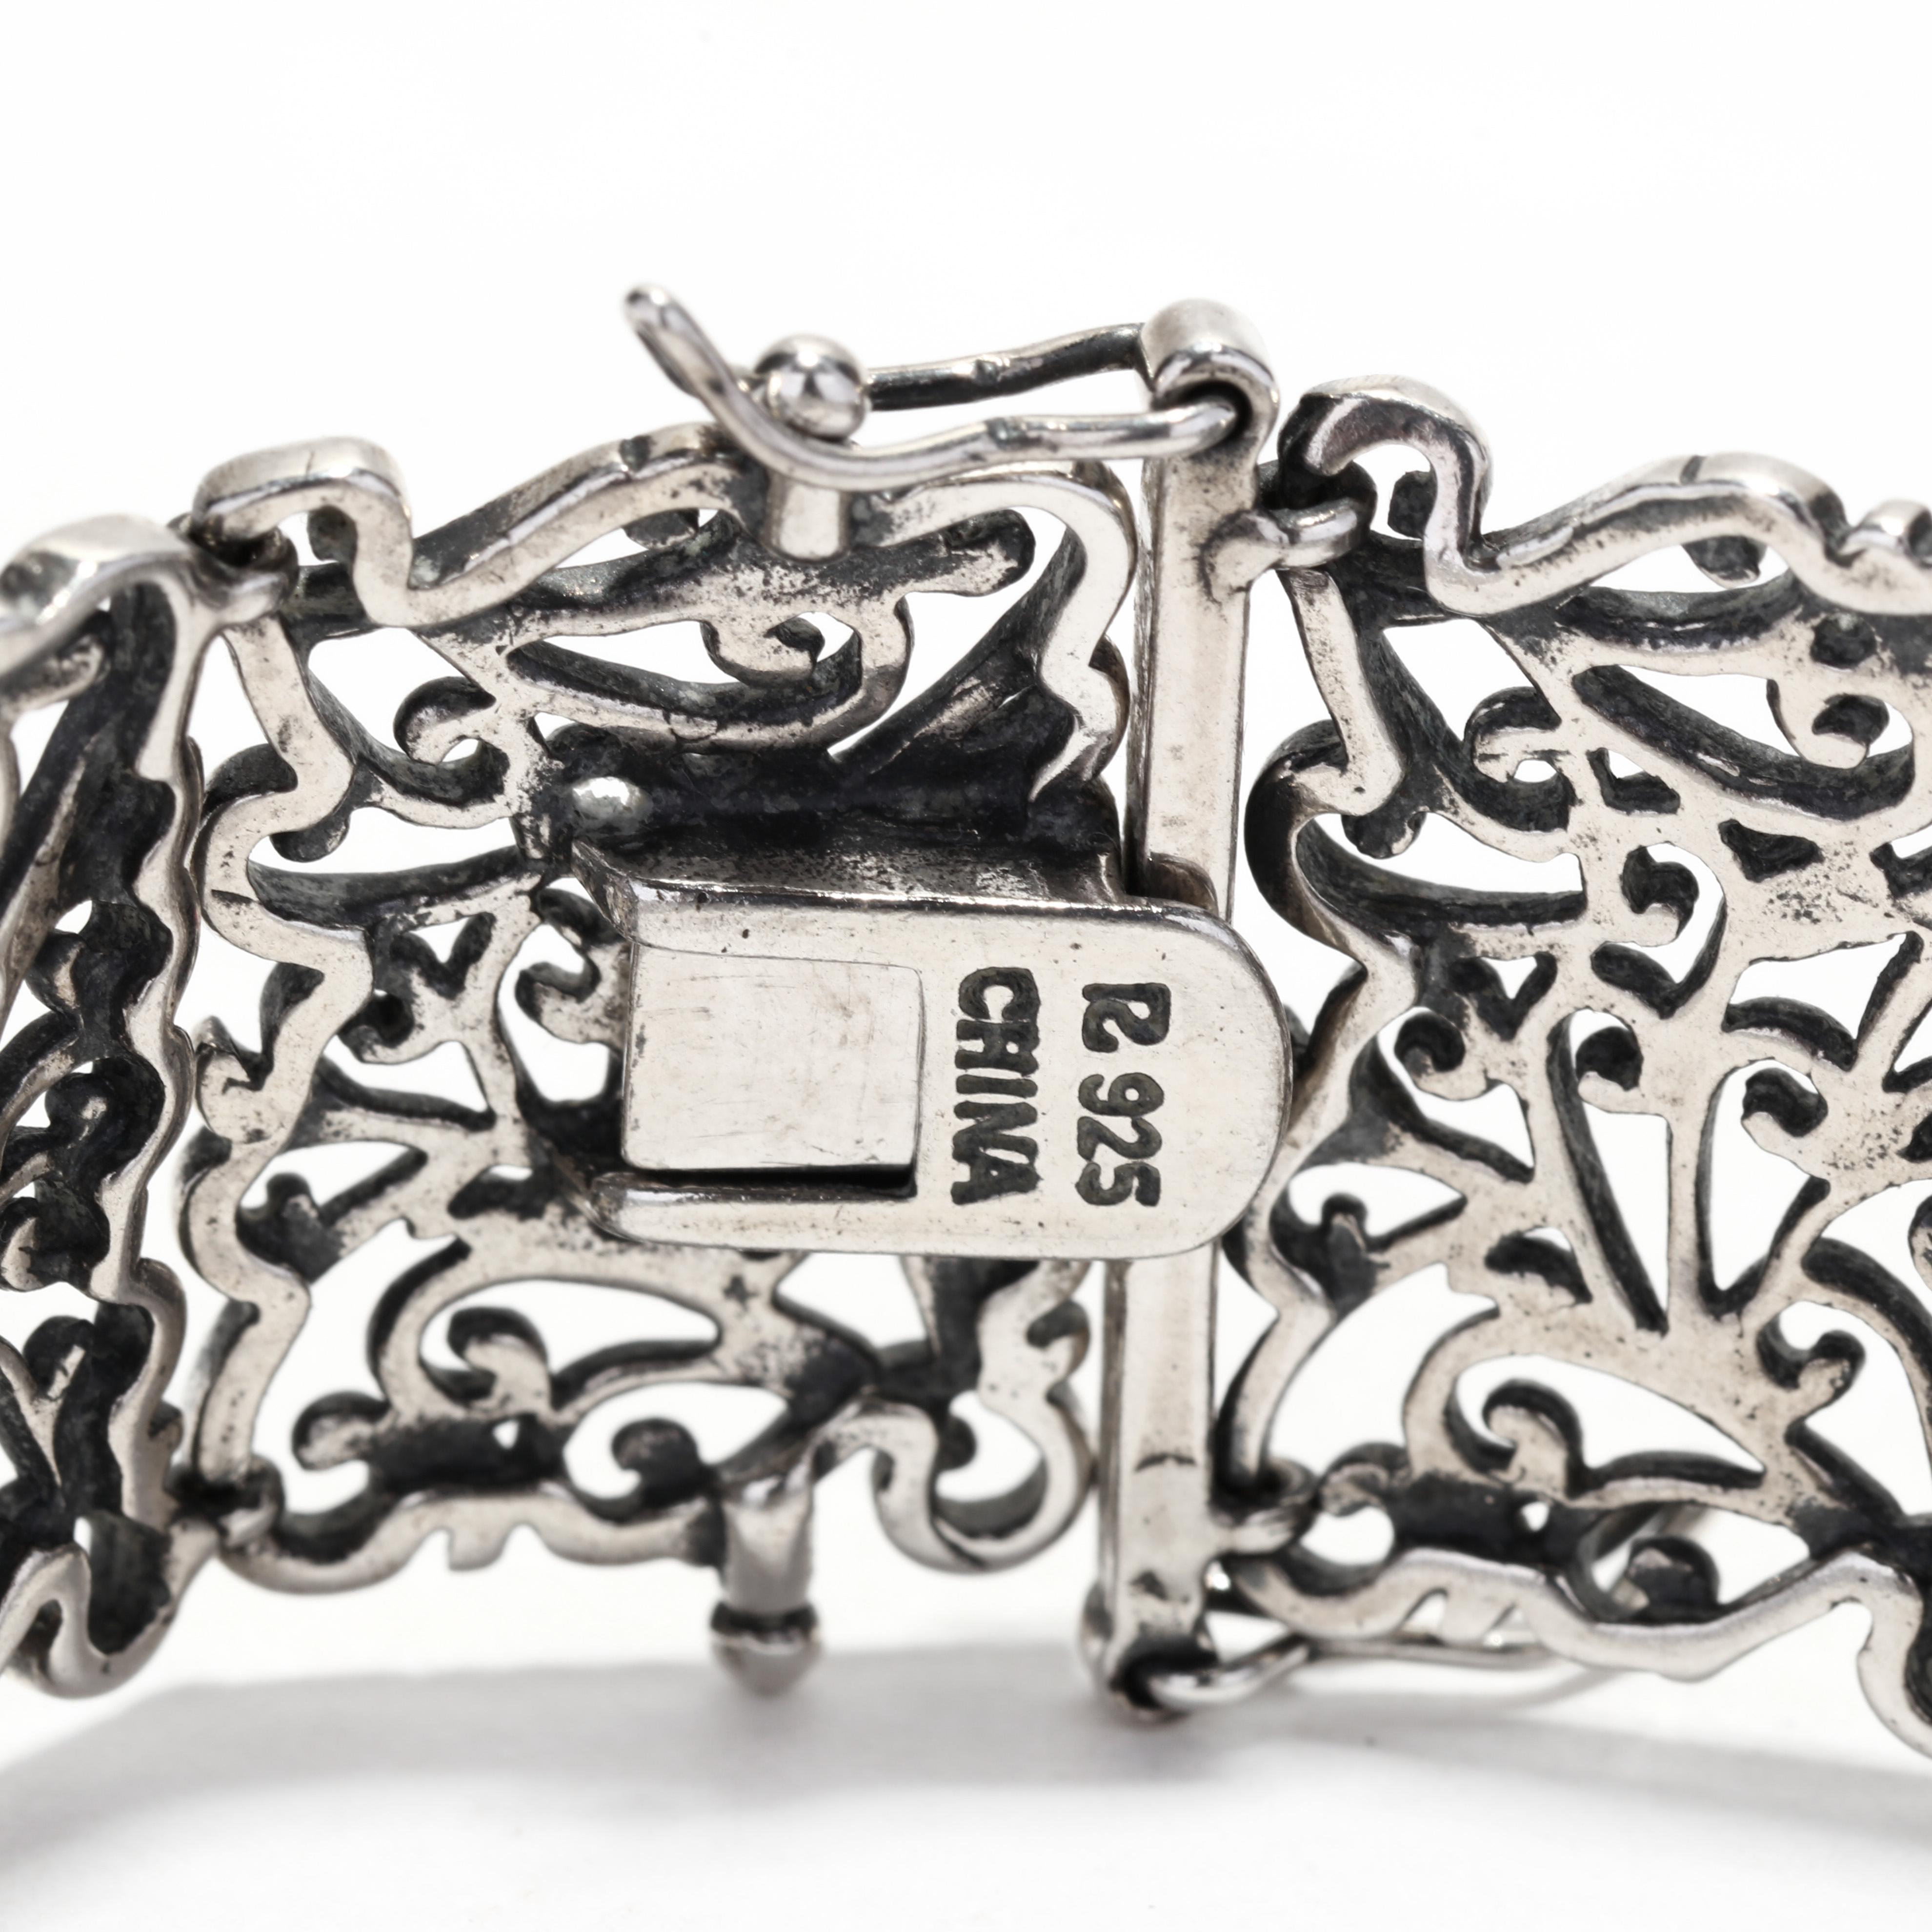 A vintage sterling silver wide filigree bracelet. This wide bracelet features rectangular scroll filigree links and with a box clasp.

Length: 7.25 in.

Width: 3/4 in.

Weight: 17.1 dwts. / 26.6 grams

Stamps: 925 CHINA

Ring Sizings &